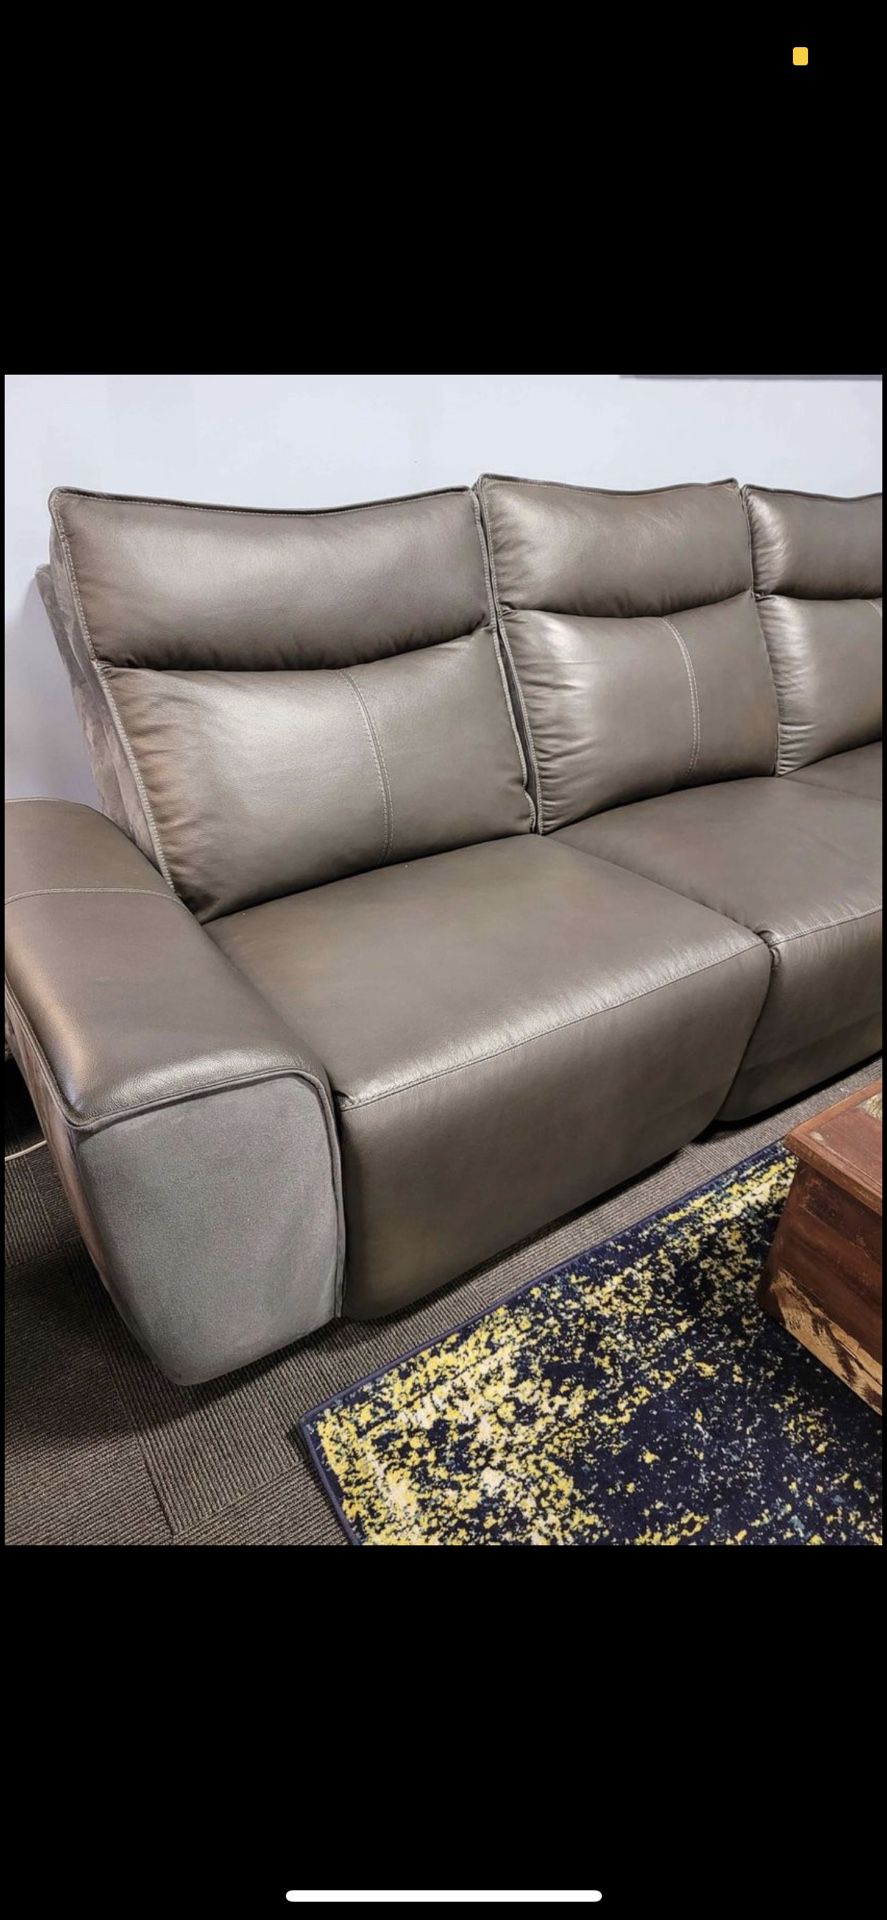 Brand new top grain Italian leather sectional IN STOCK - all power